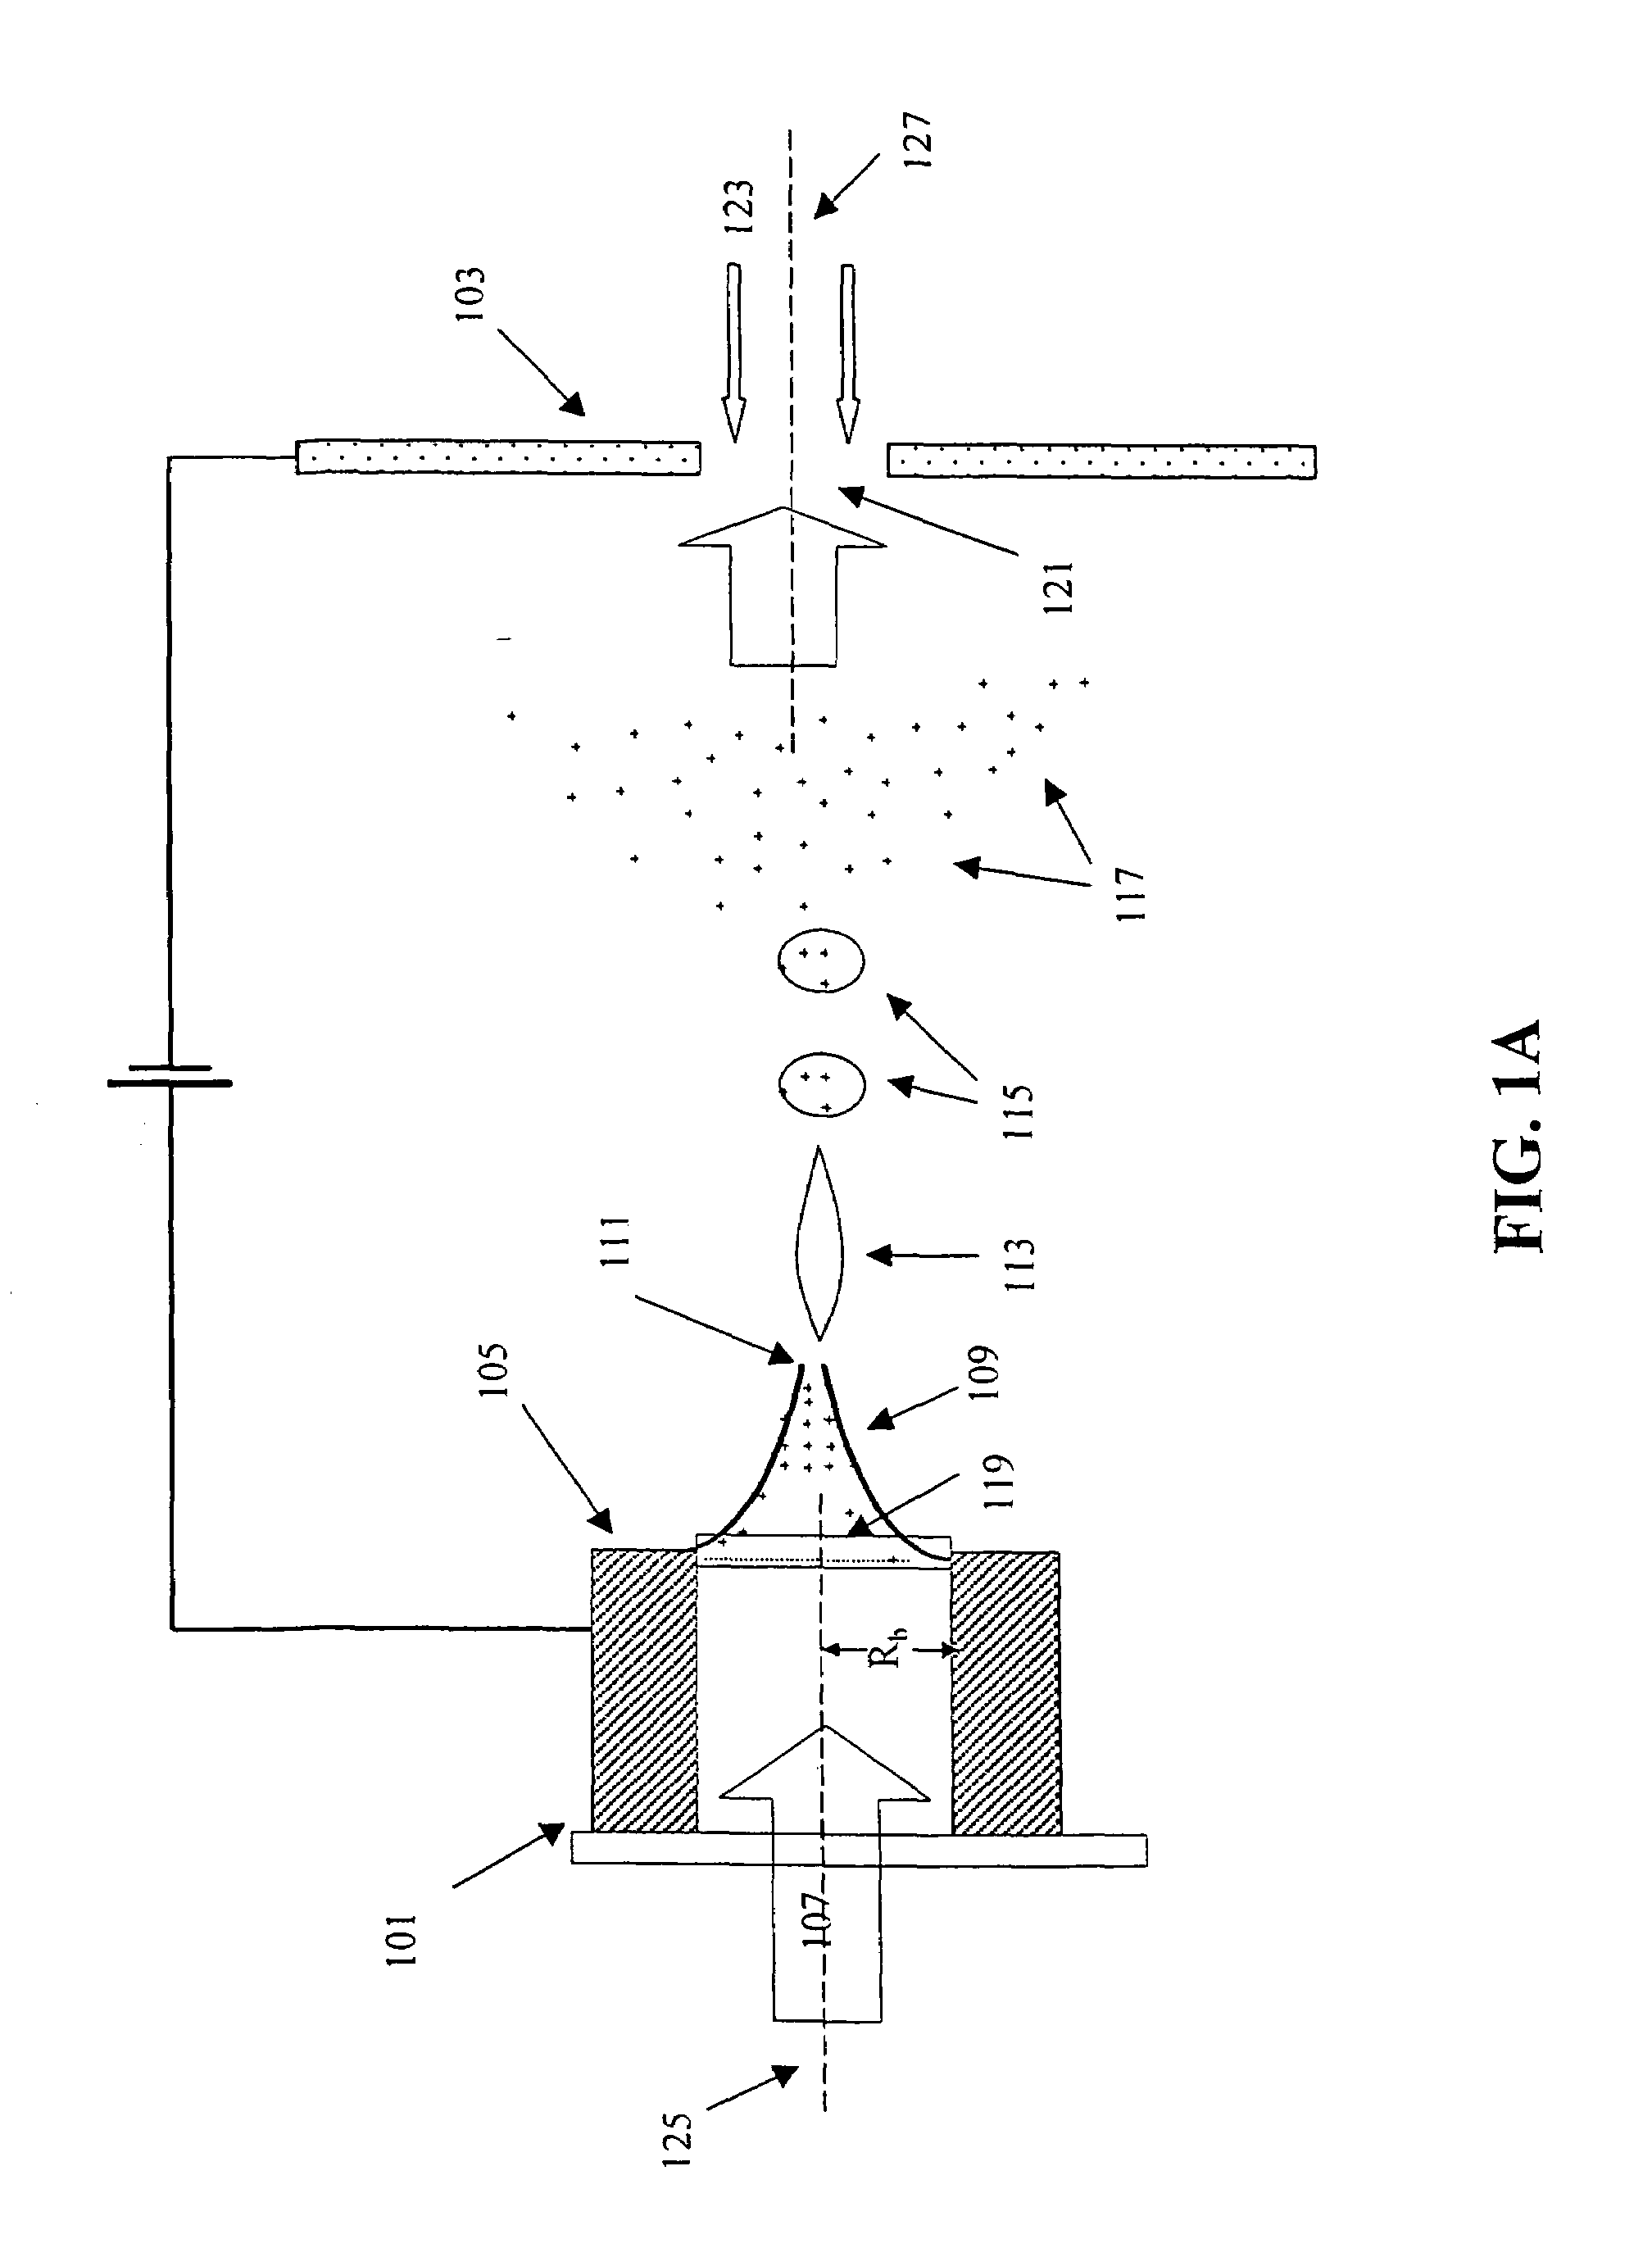 Ion source frequency feedback device and method